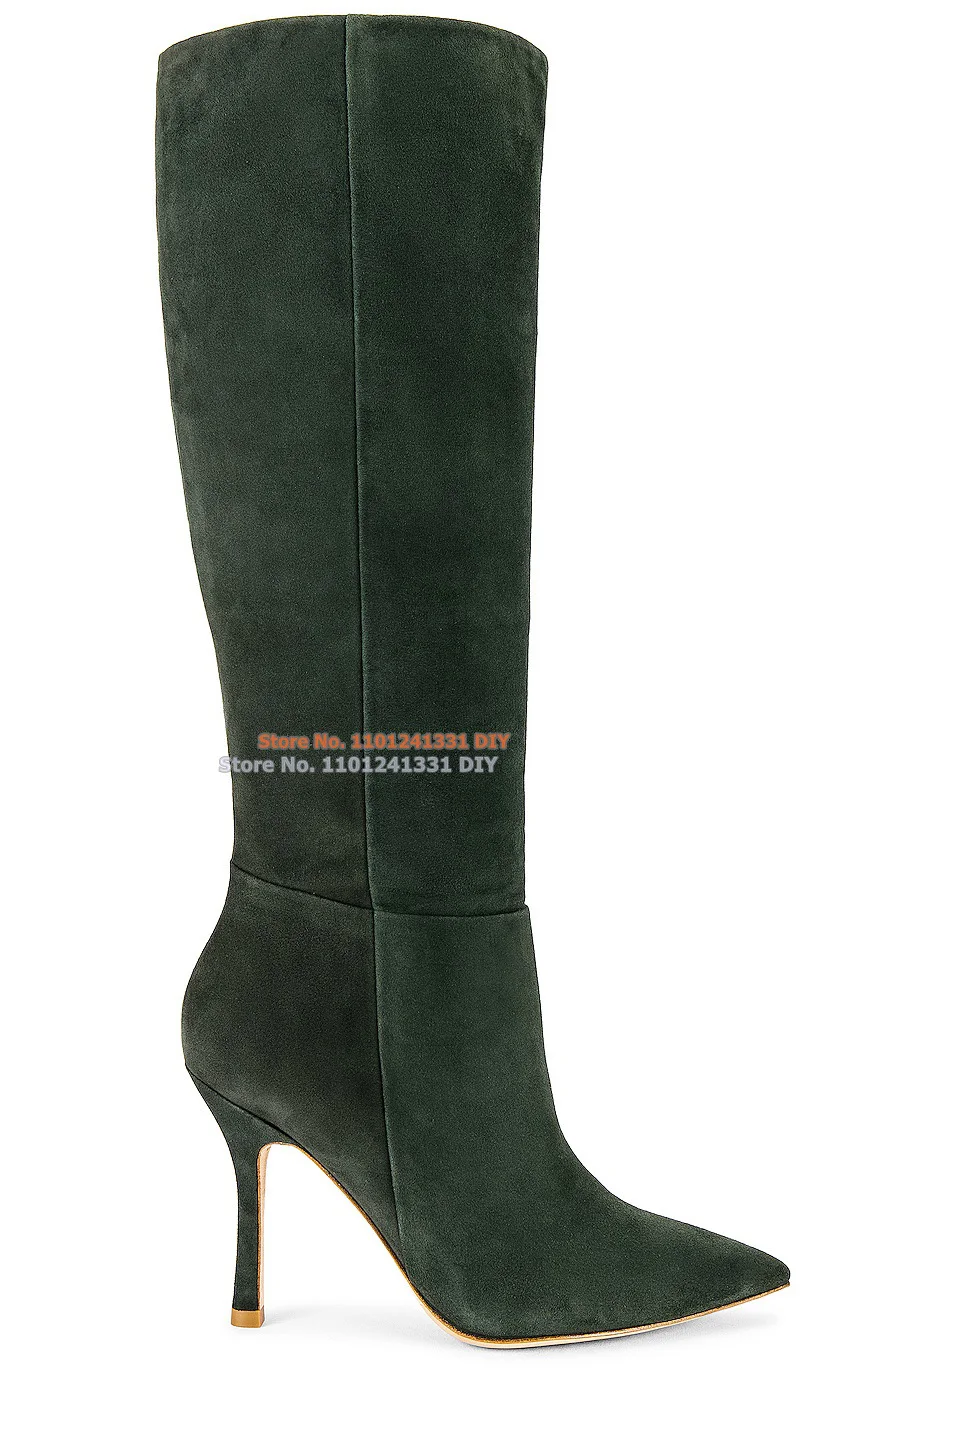 Military Green Winter Long Lory Boots Suede Leather Thin High Heel Knee High Boot Women Plus Size 35-45